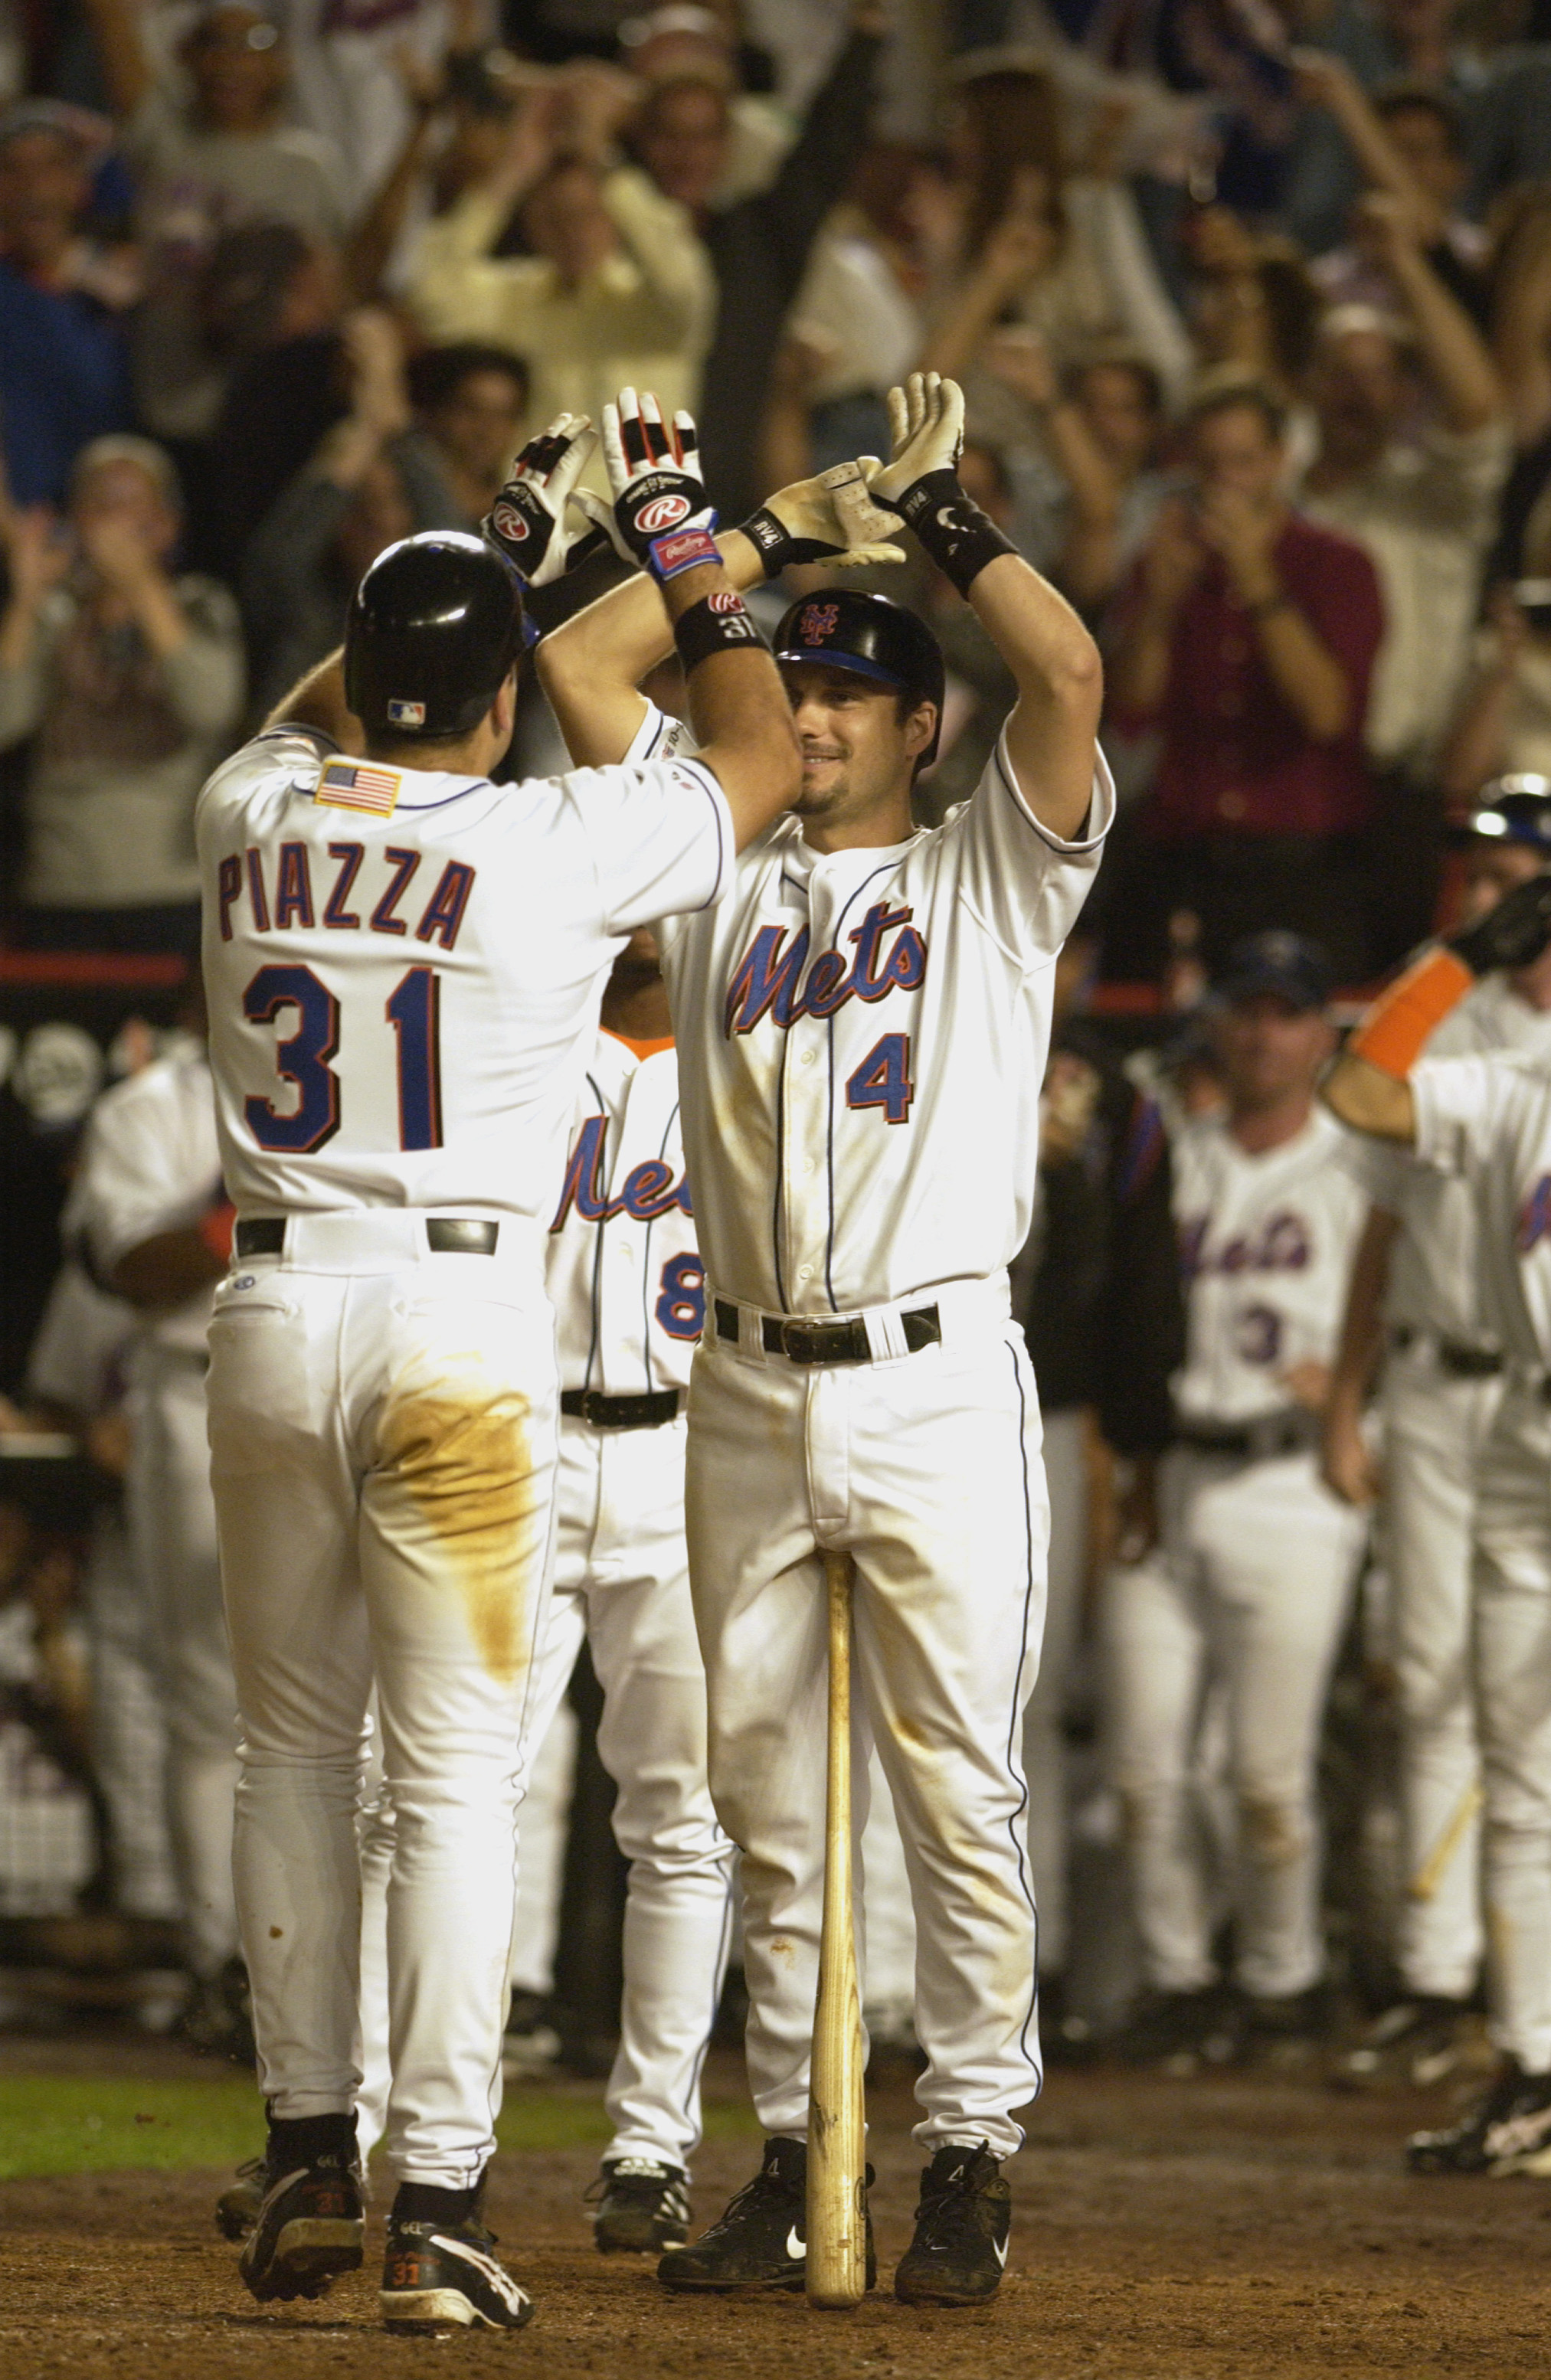 Back Stories: Piazza Hits The Home Run The City Needed